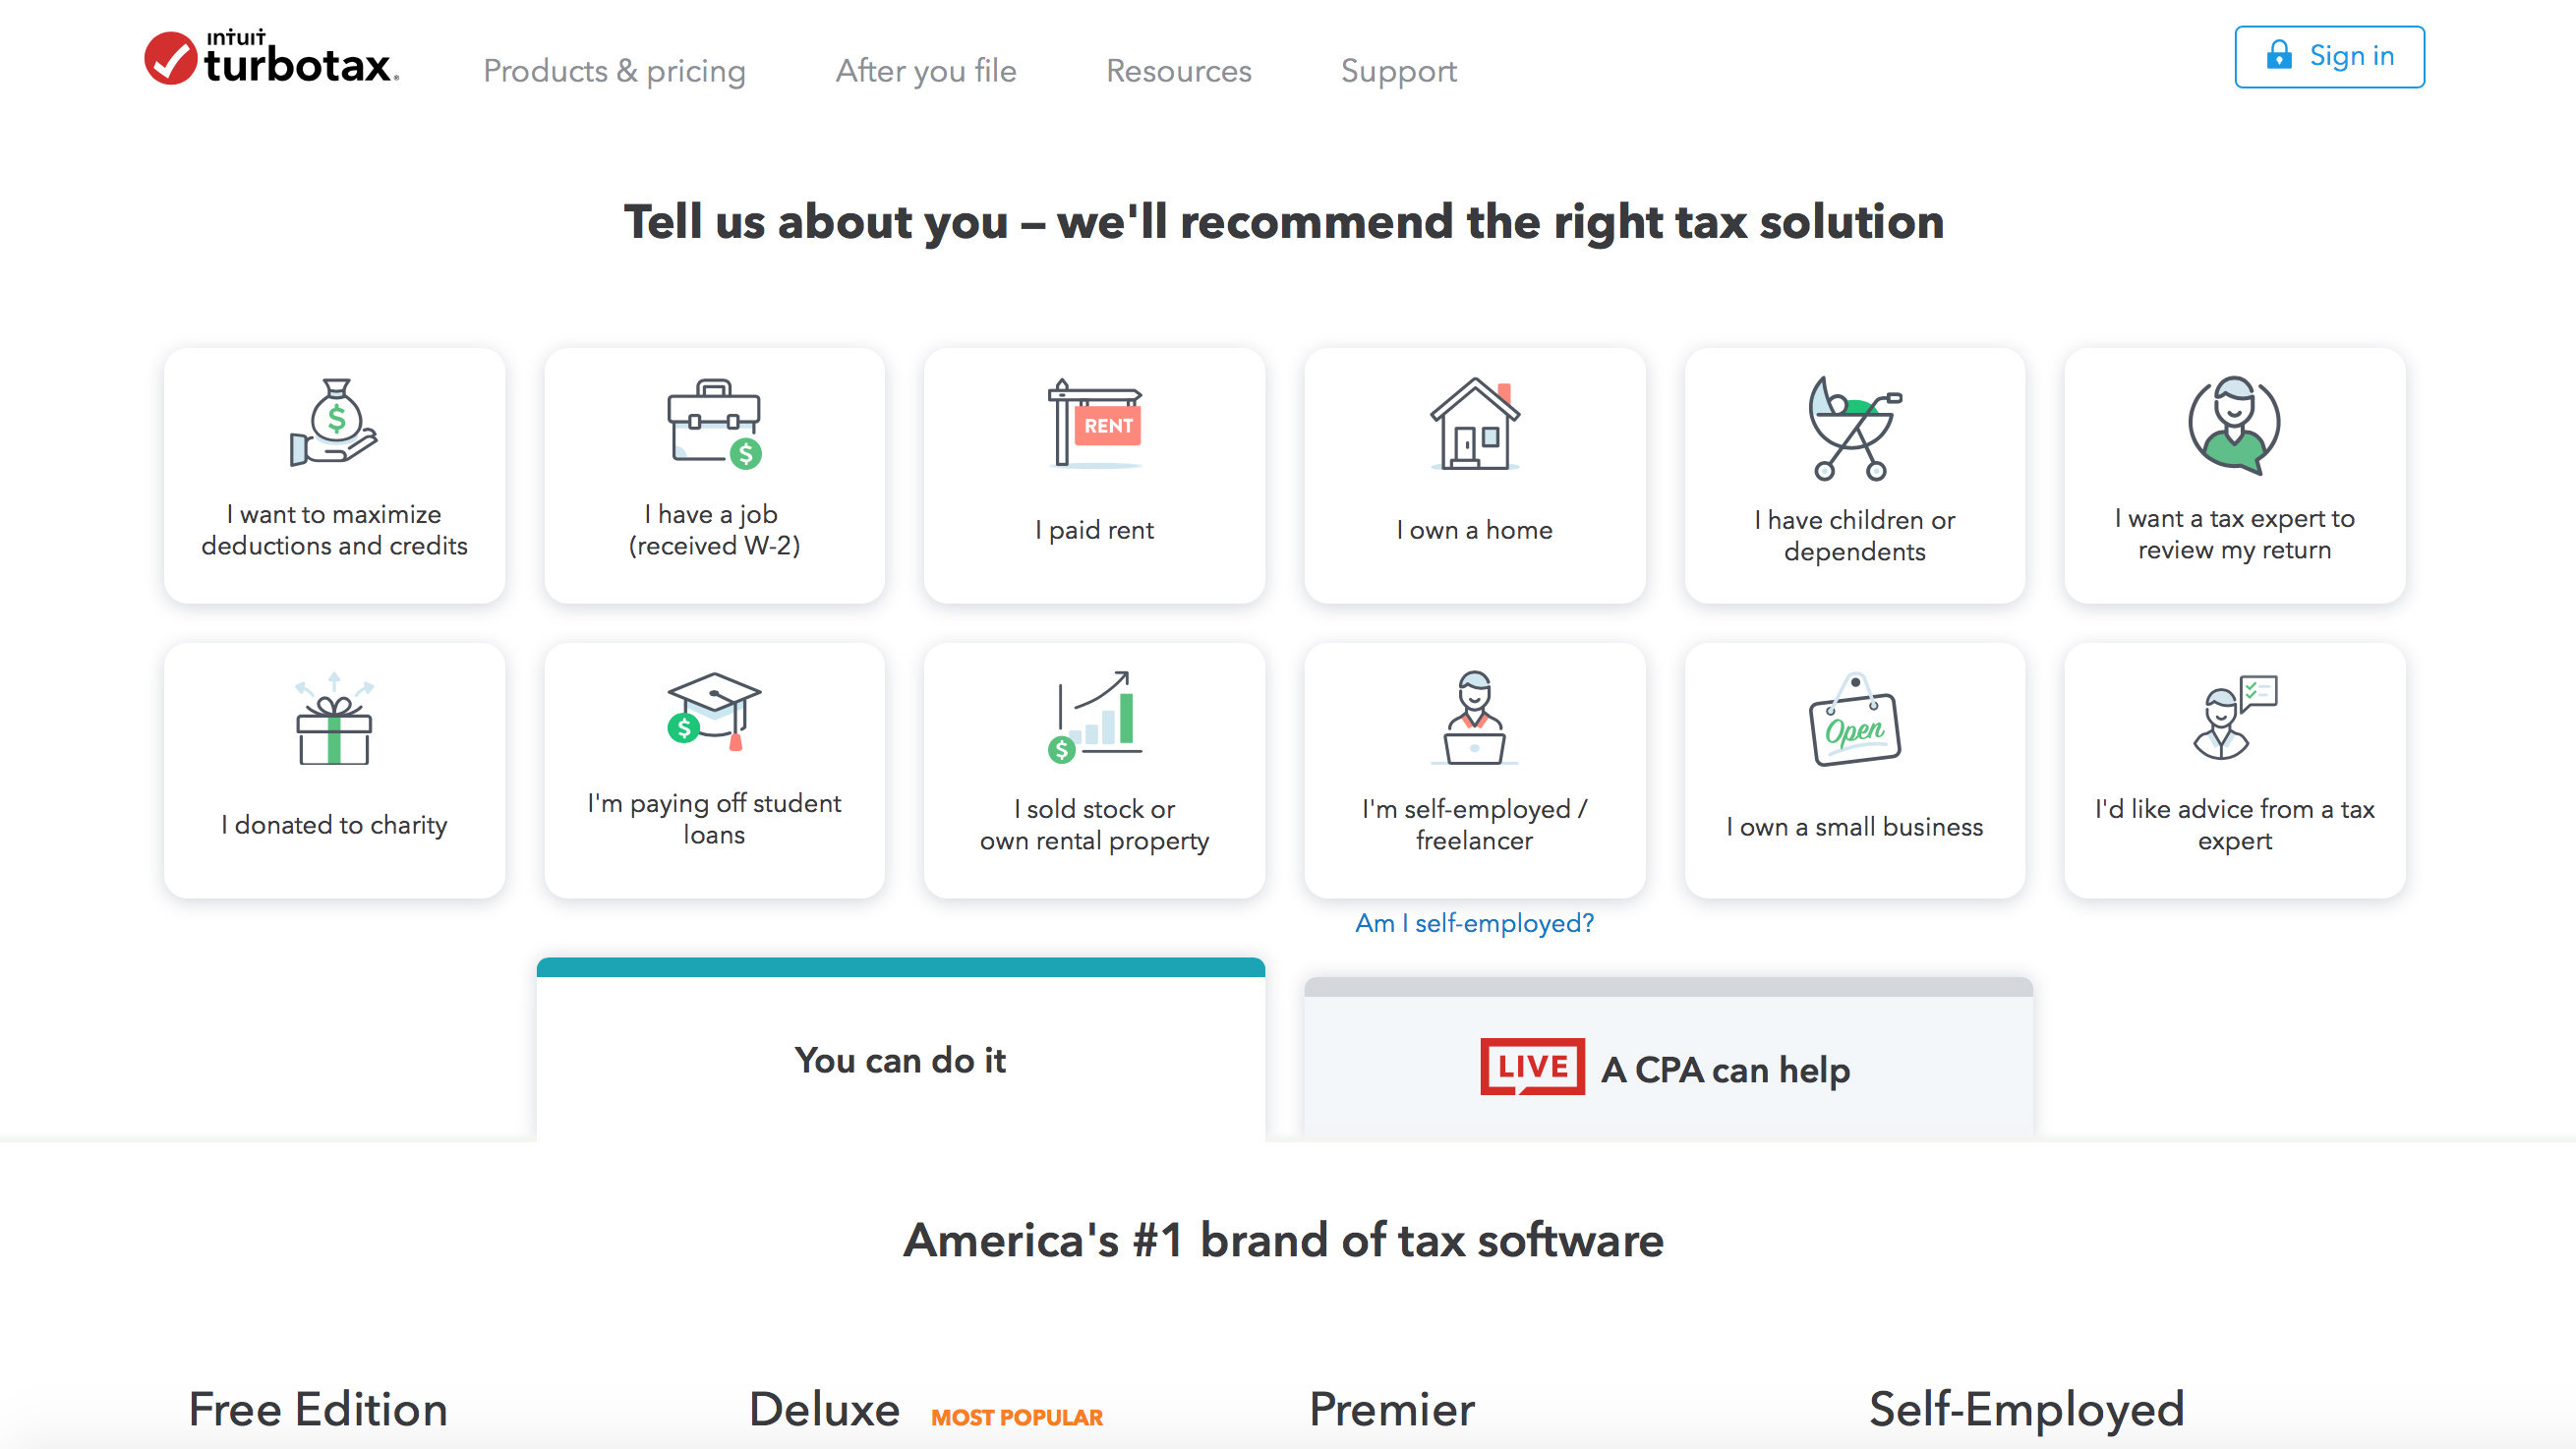 turbotax products and services